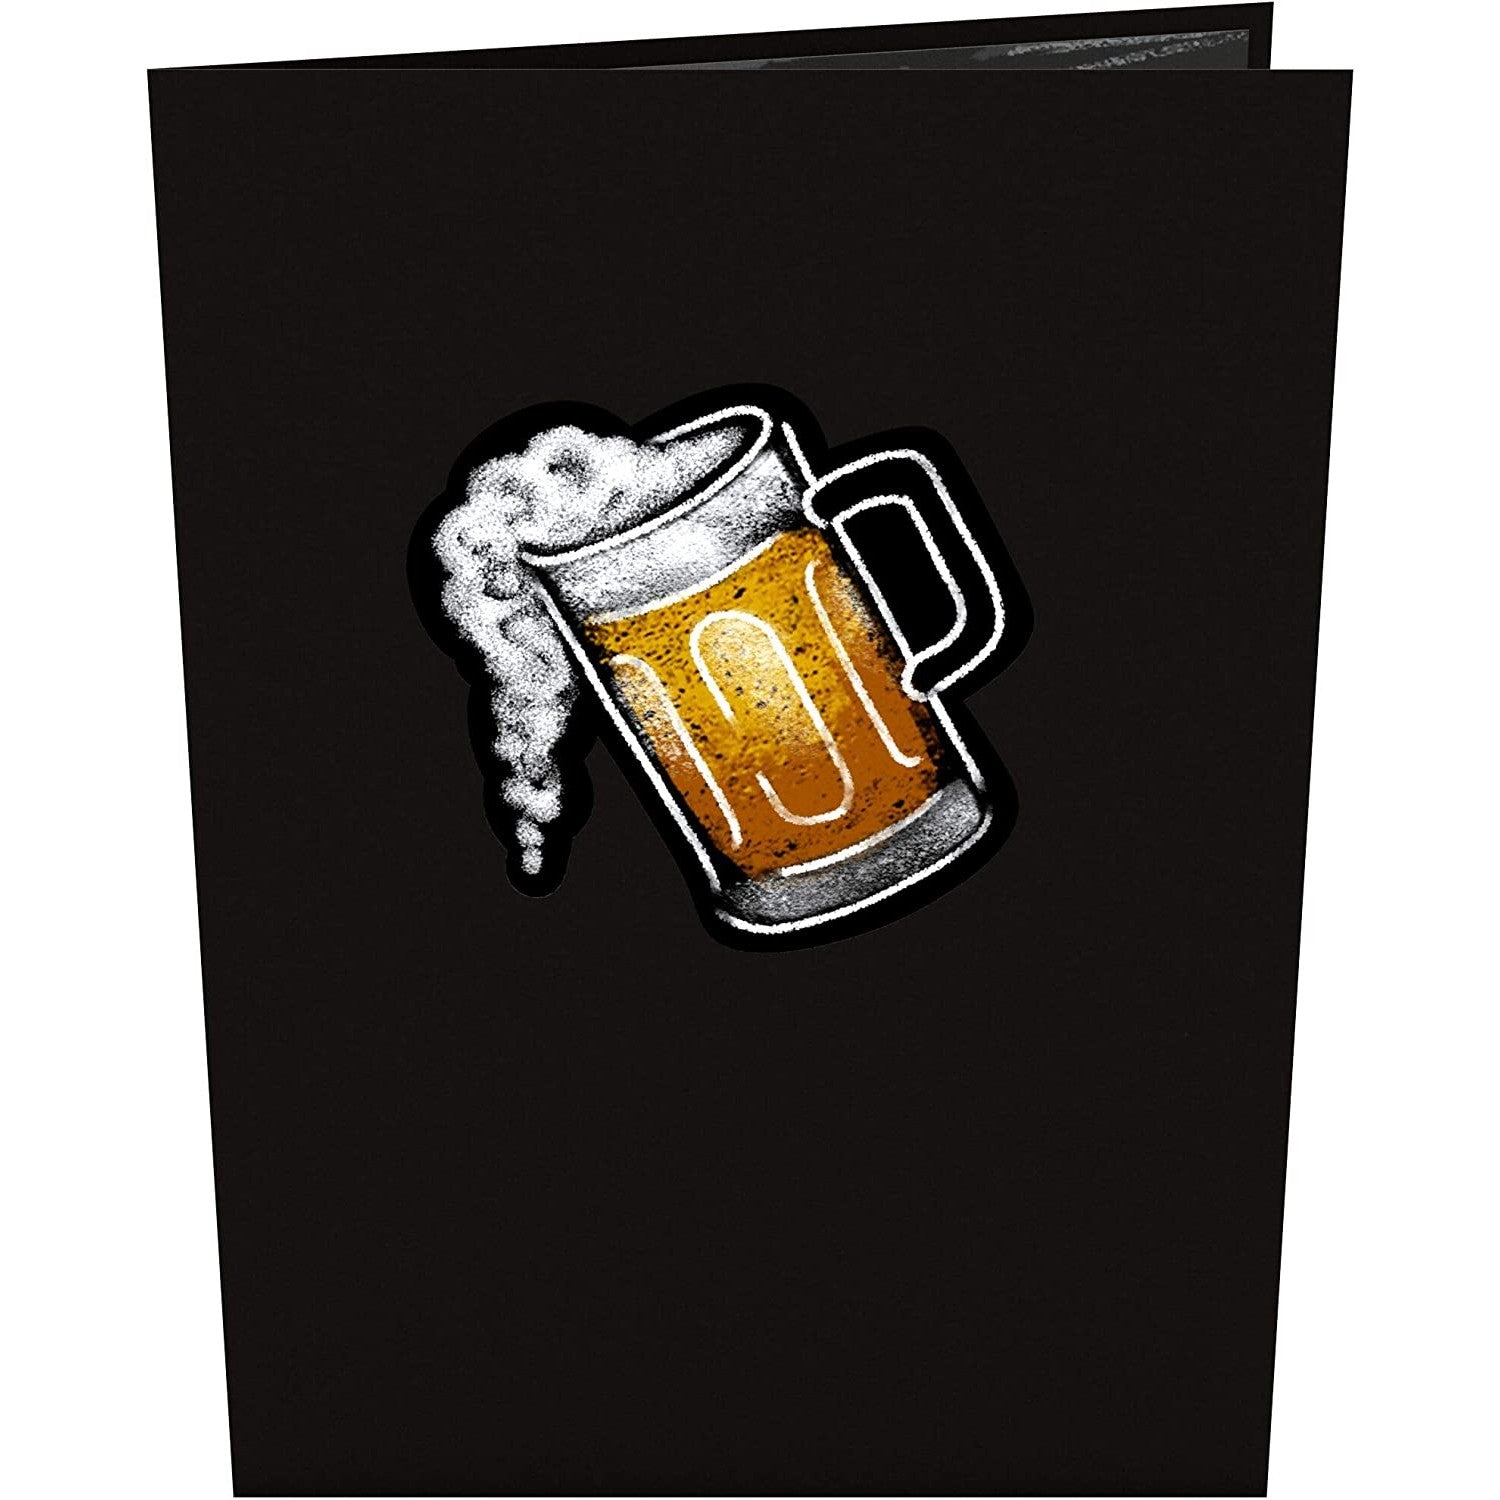 The front cover of a 3D greeting card which has a stein full of beer on the front.